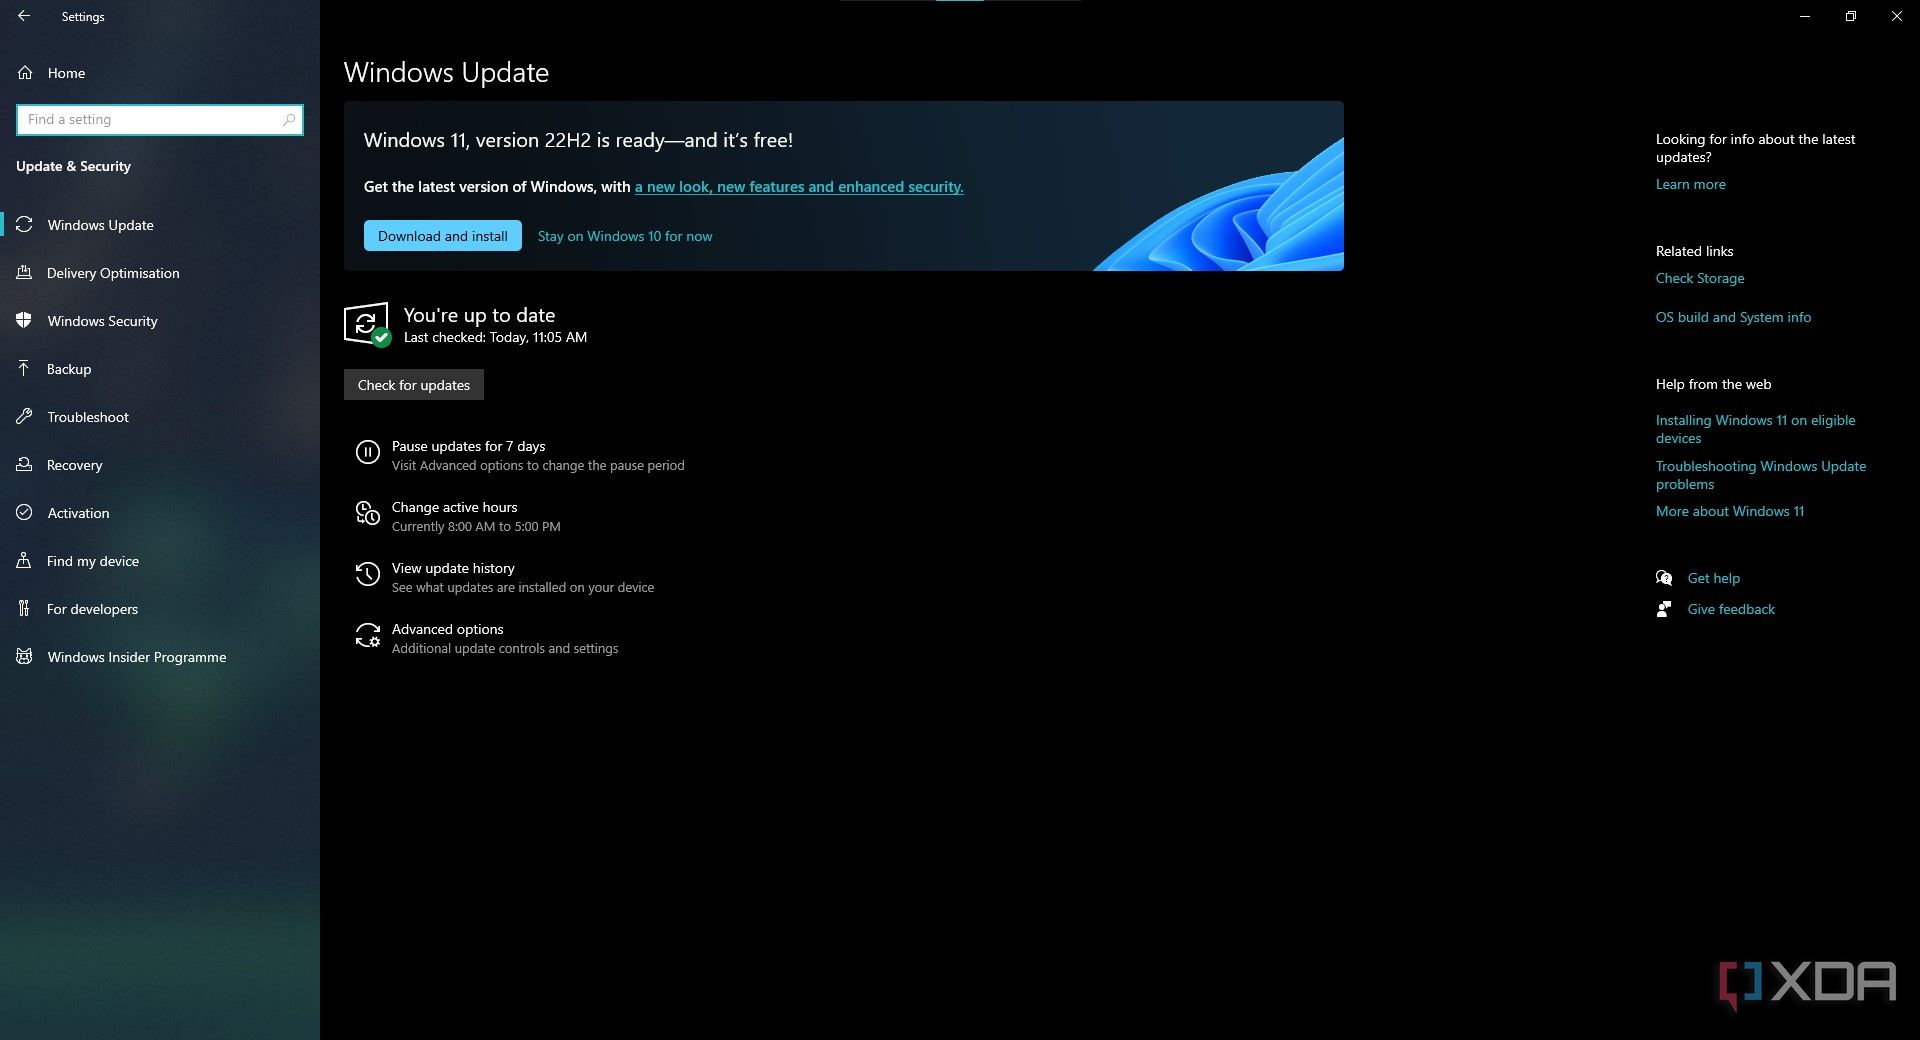 Screenshot of Windows Update in Windows 10 showing an update to Windows 11 version 22H2 is available